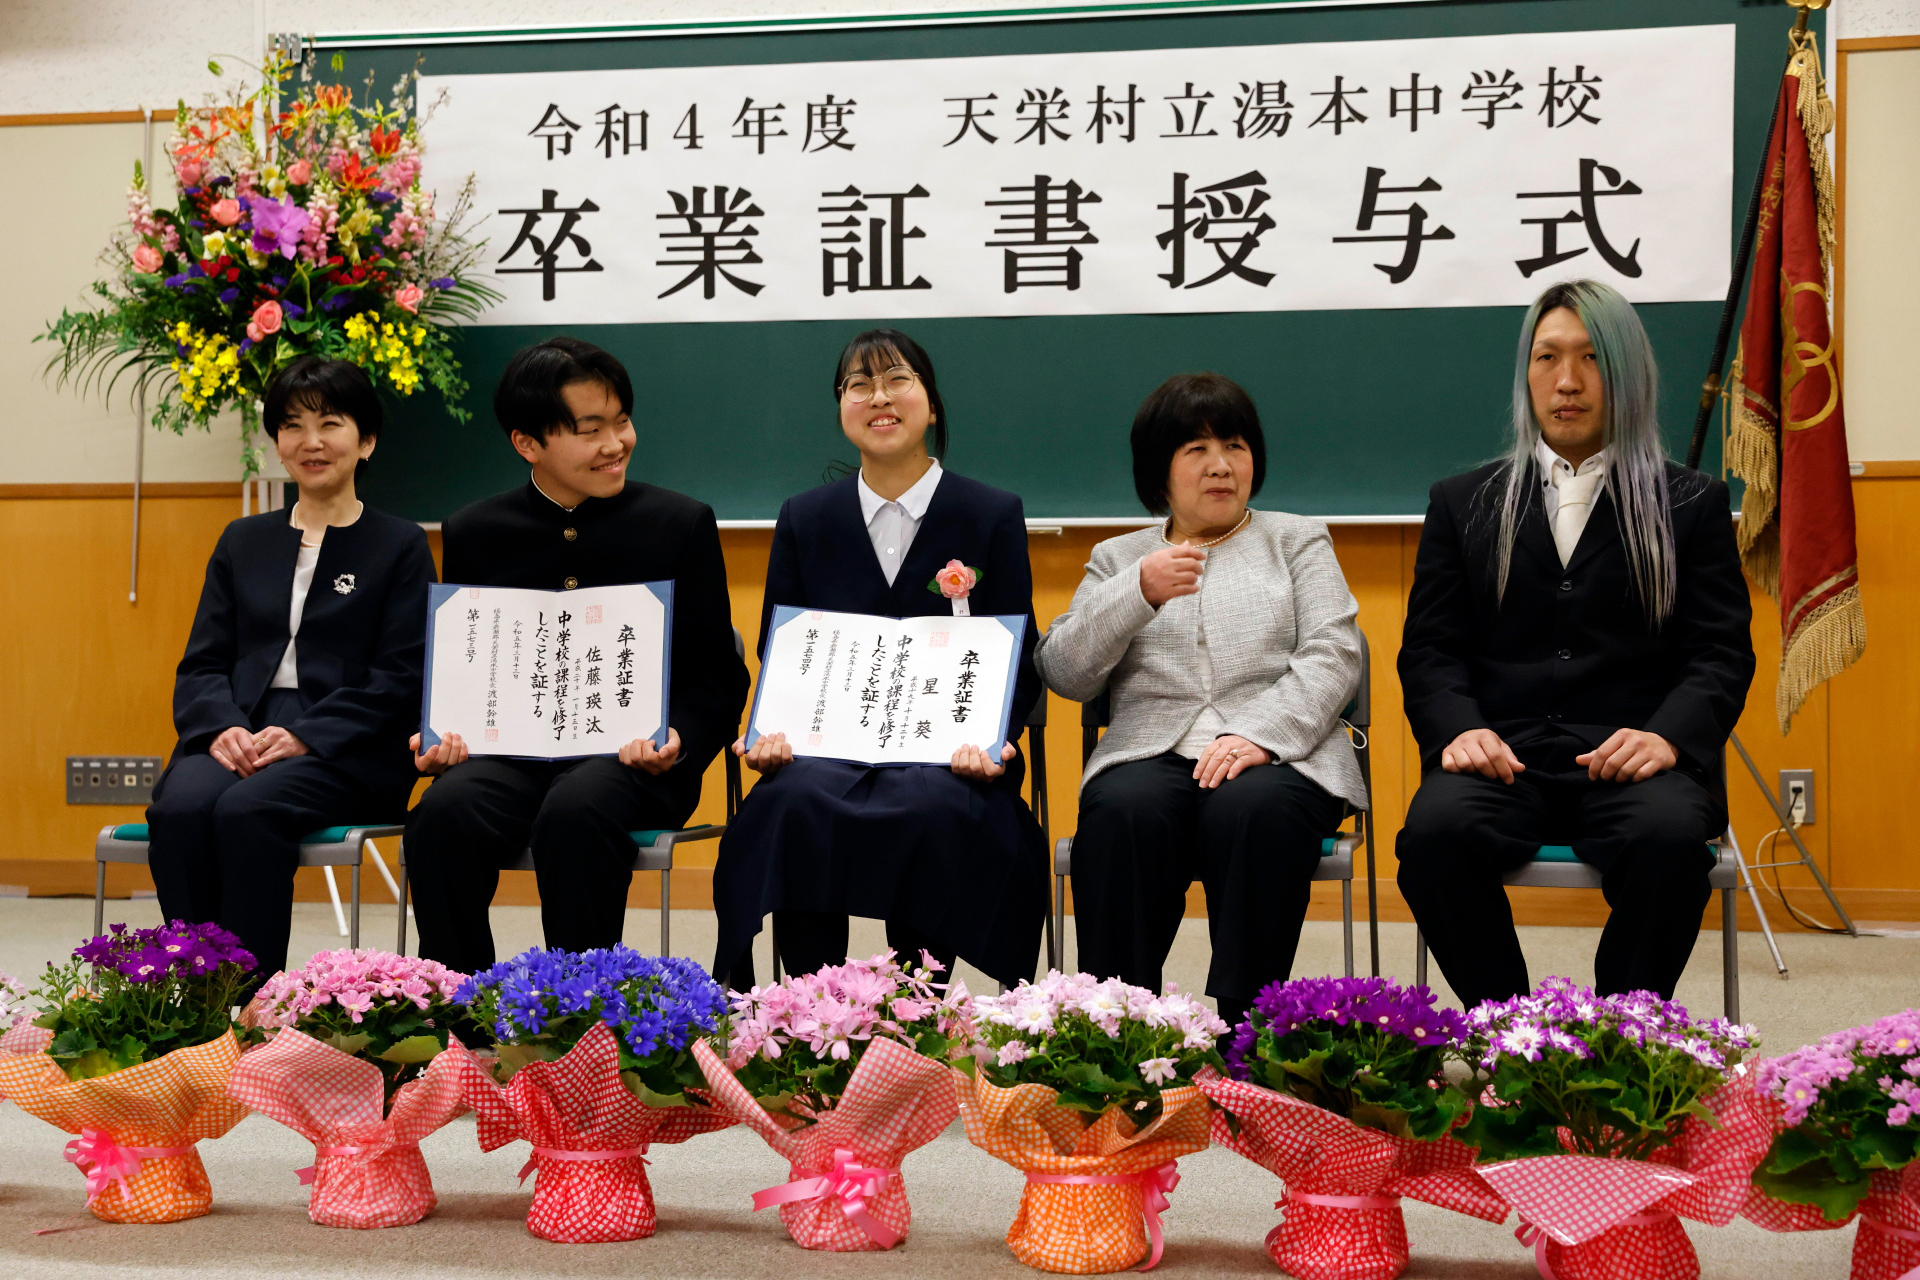 Eita and Aoi attend a photo session with Eita’s mother Masumi and Aoi’s grandmother Hisako (second from the right), 68, and father Kazuhisa, 37, after the students’ graduation and the institution’s closing ceremony, in Ten-ei Village, Japan March 13, 2023. Photo: Reuters